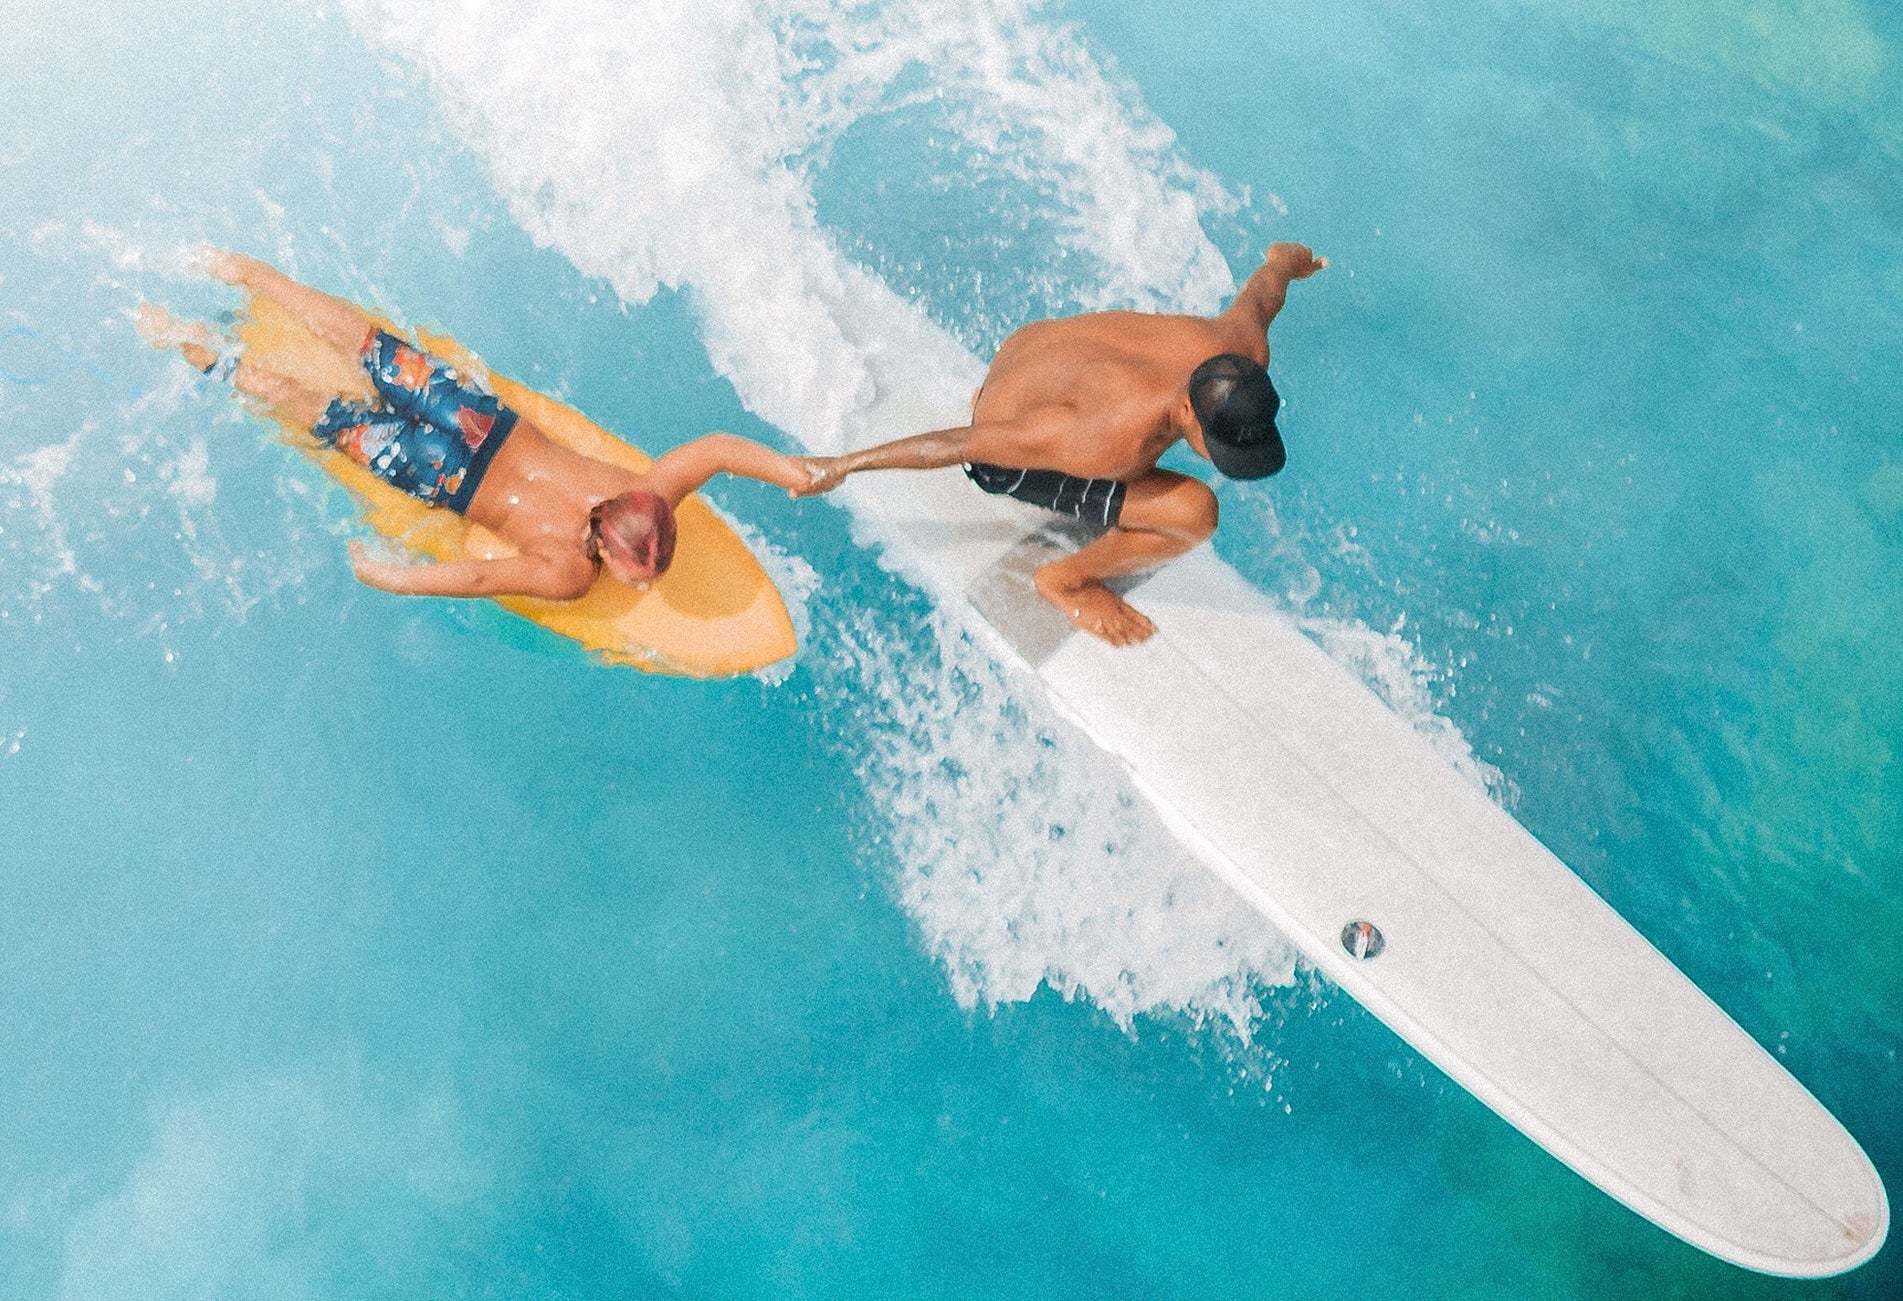 A Surfboard Success Story You’ll Never Believe